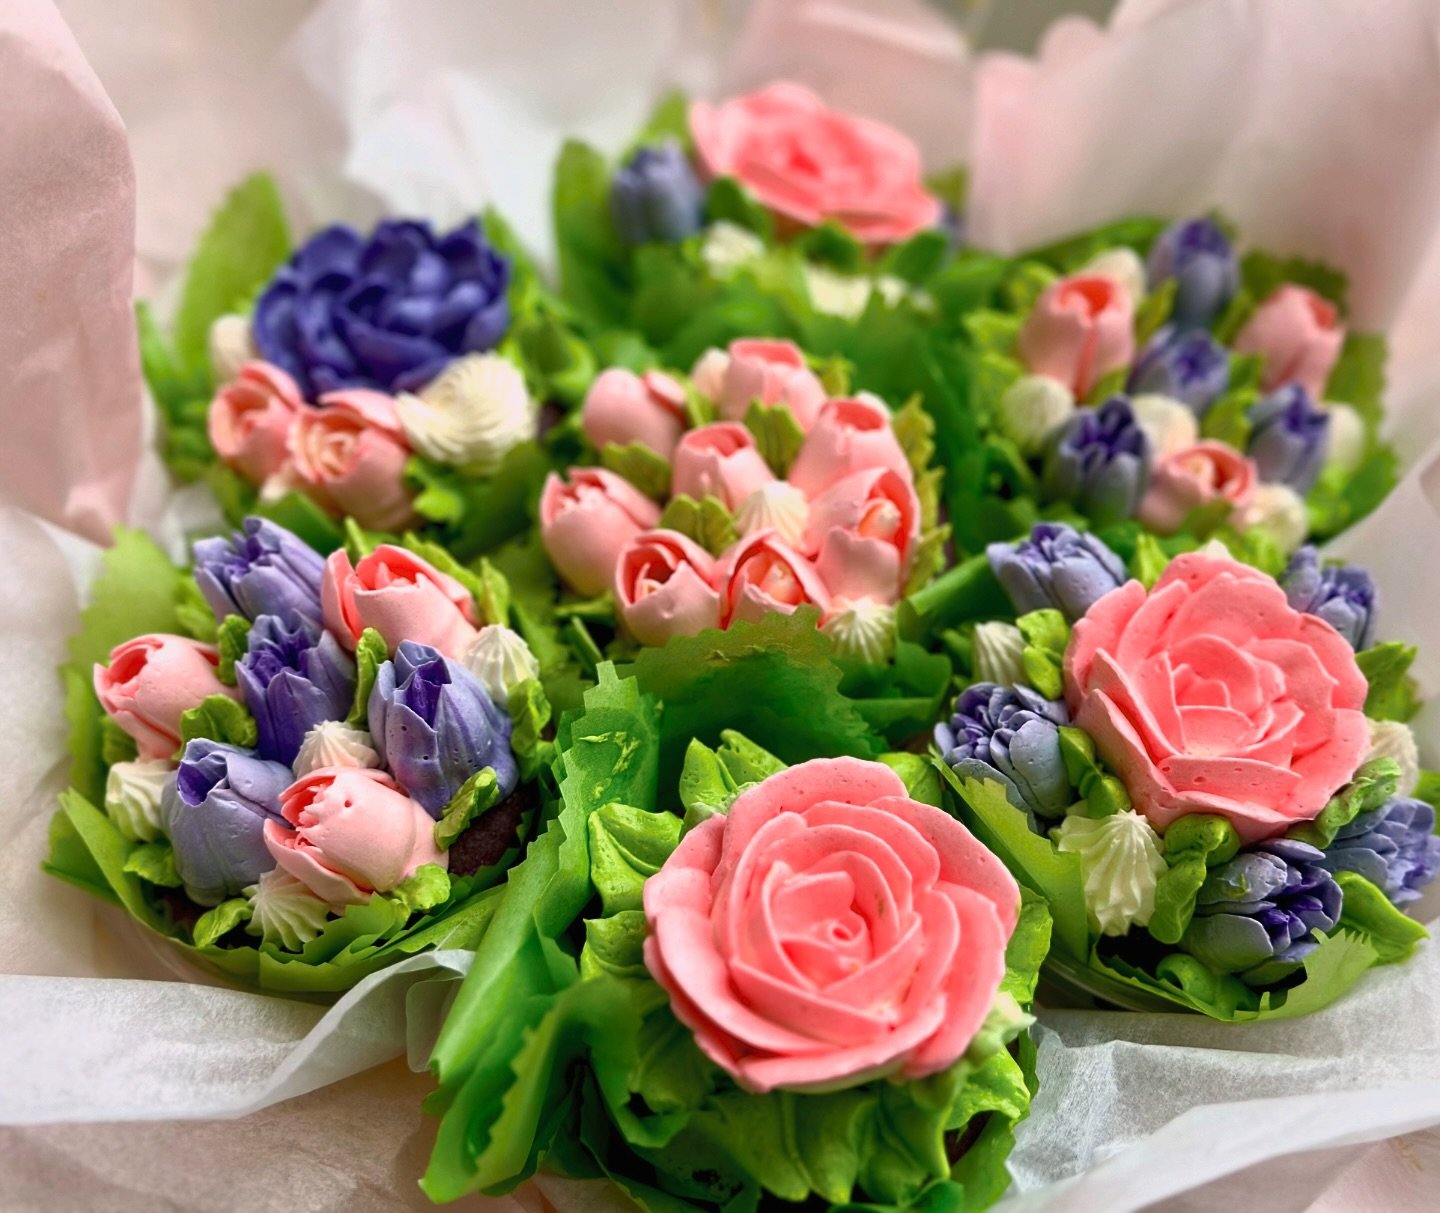 🌸 💕 Treat Mom to a bouquet that&rsquo;s as sweet as she is! Our Cupcake Bouquets are the perfect way to show your love this Mother&rsquo;s Day. Indulge her sweet tooth and watch her smile bloom with every bite! 🧁 ✨ 

#celebratemomsday #mothersday 